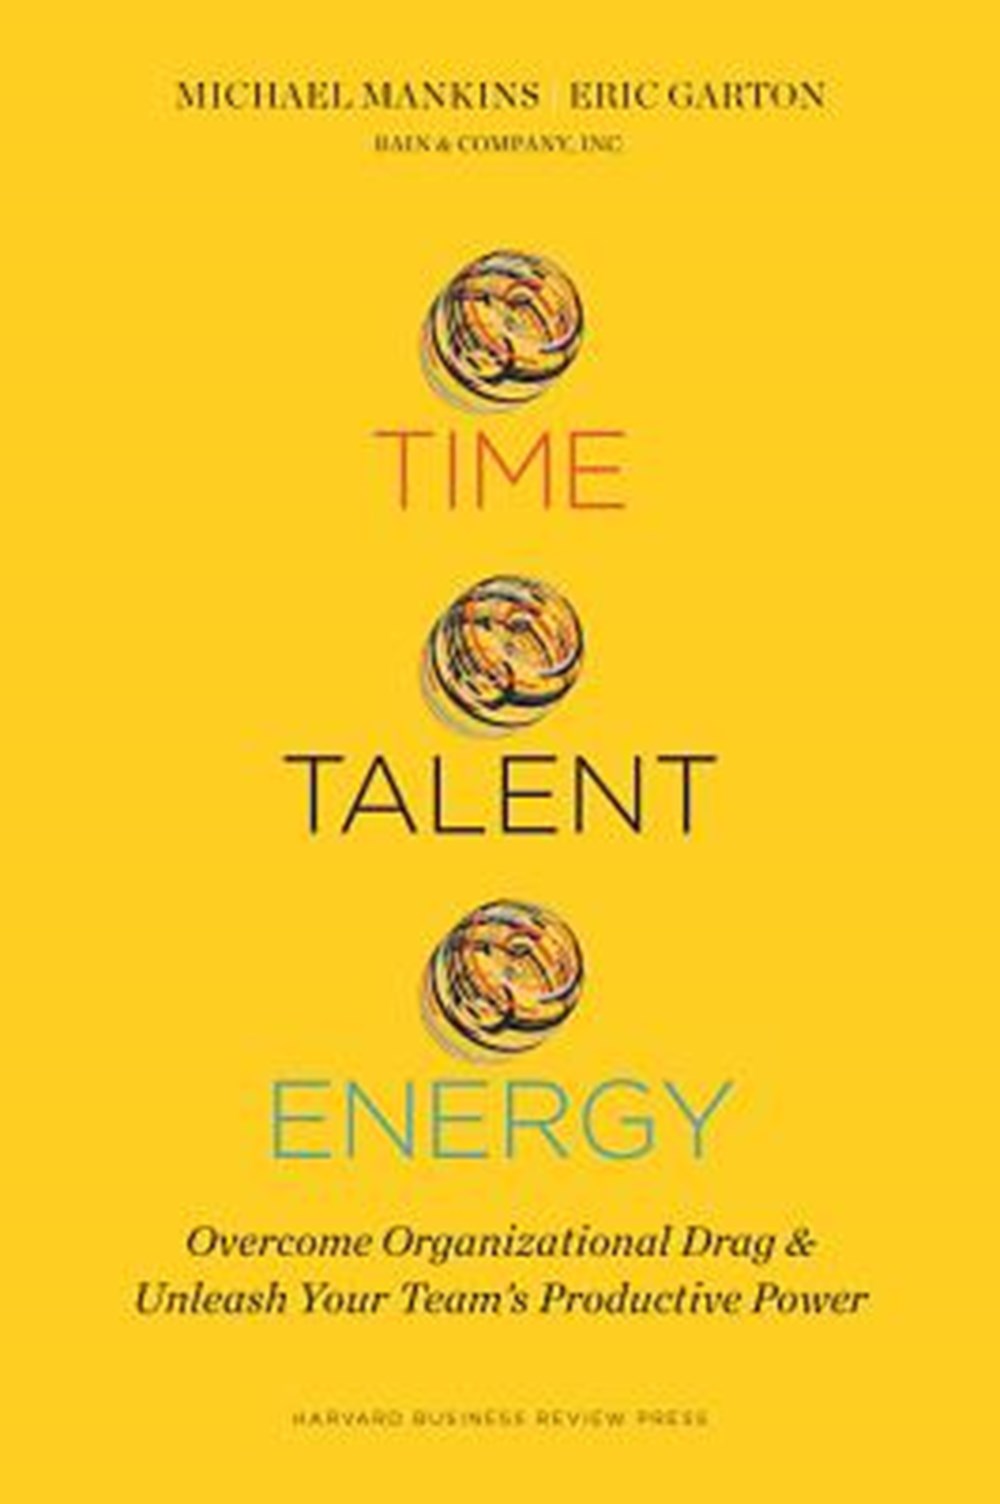 Time, Talent, Energy Overcome Organizational Drag and Unleash Your Team's Productive Power